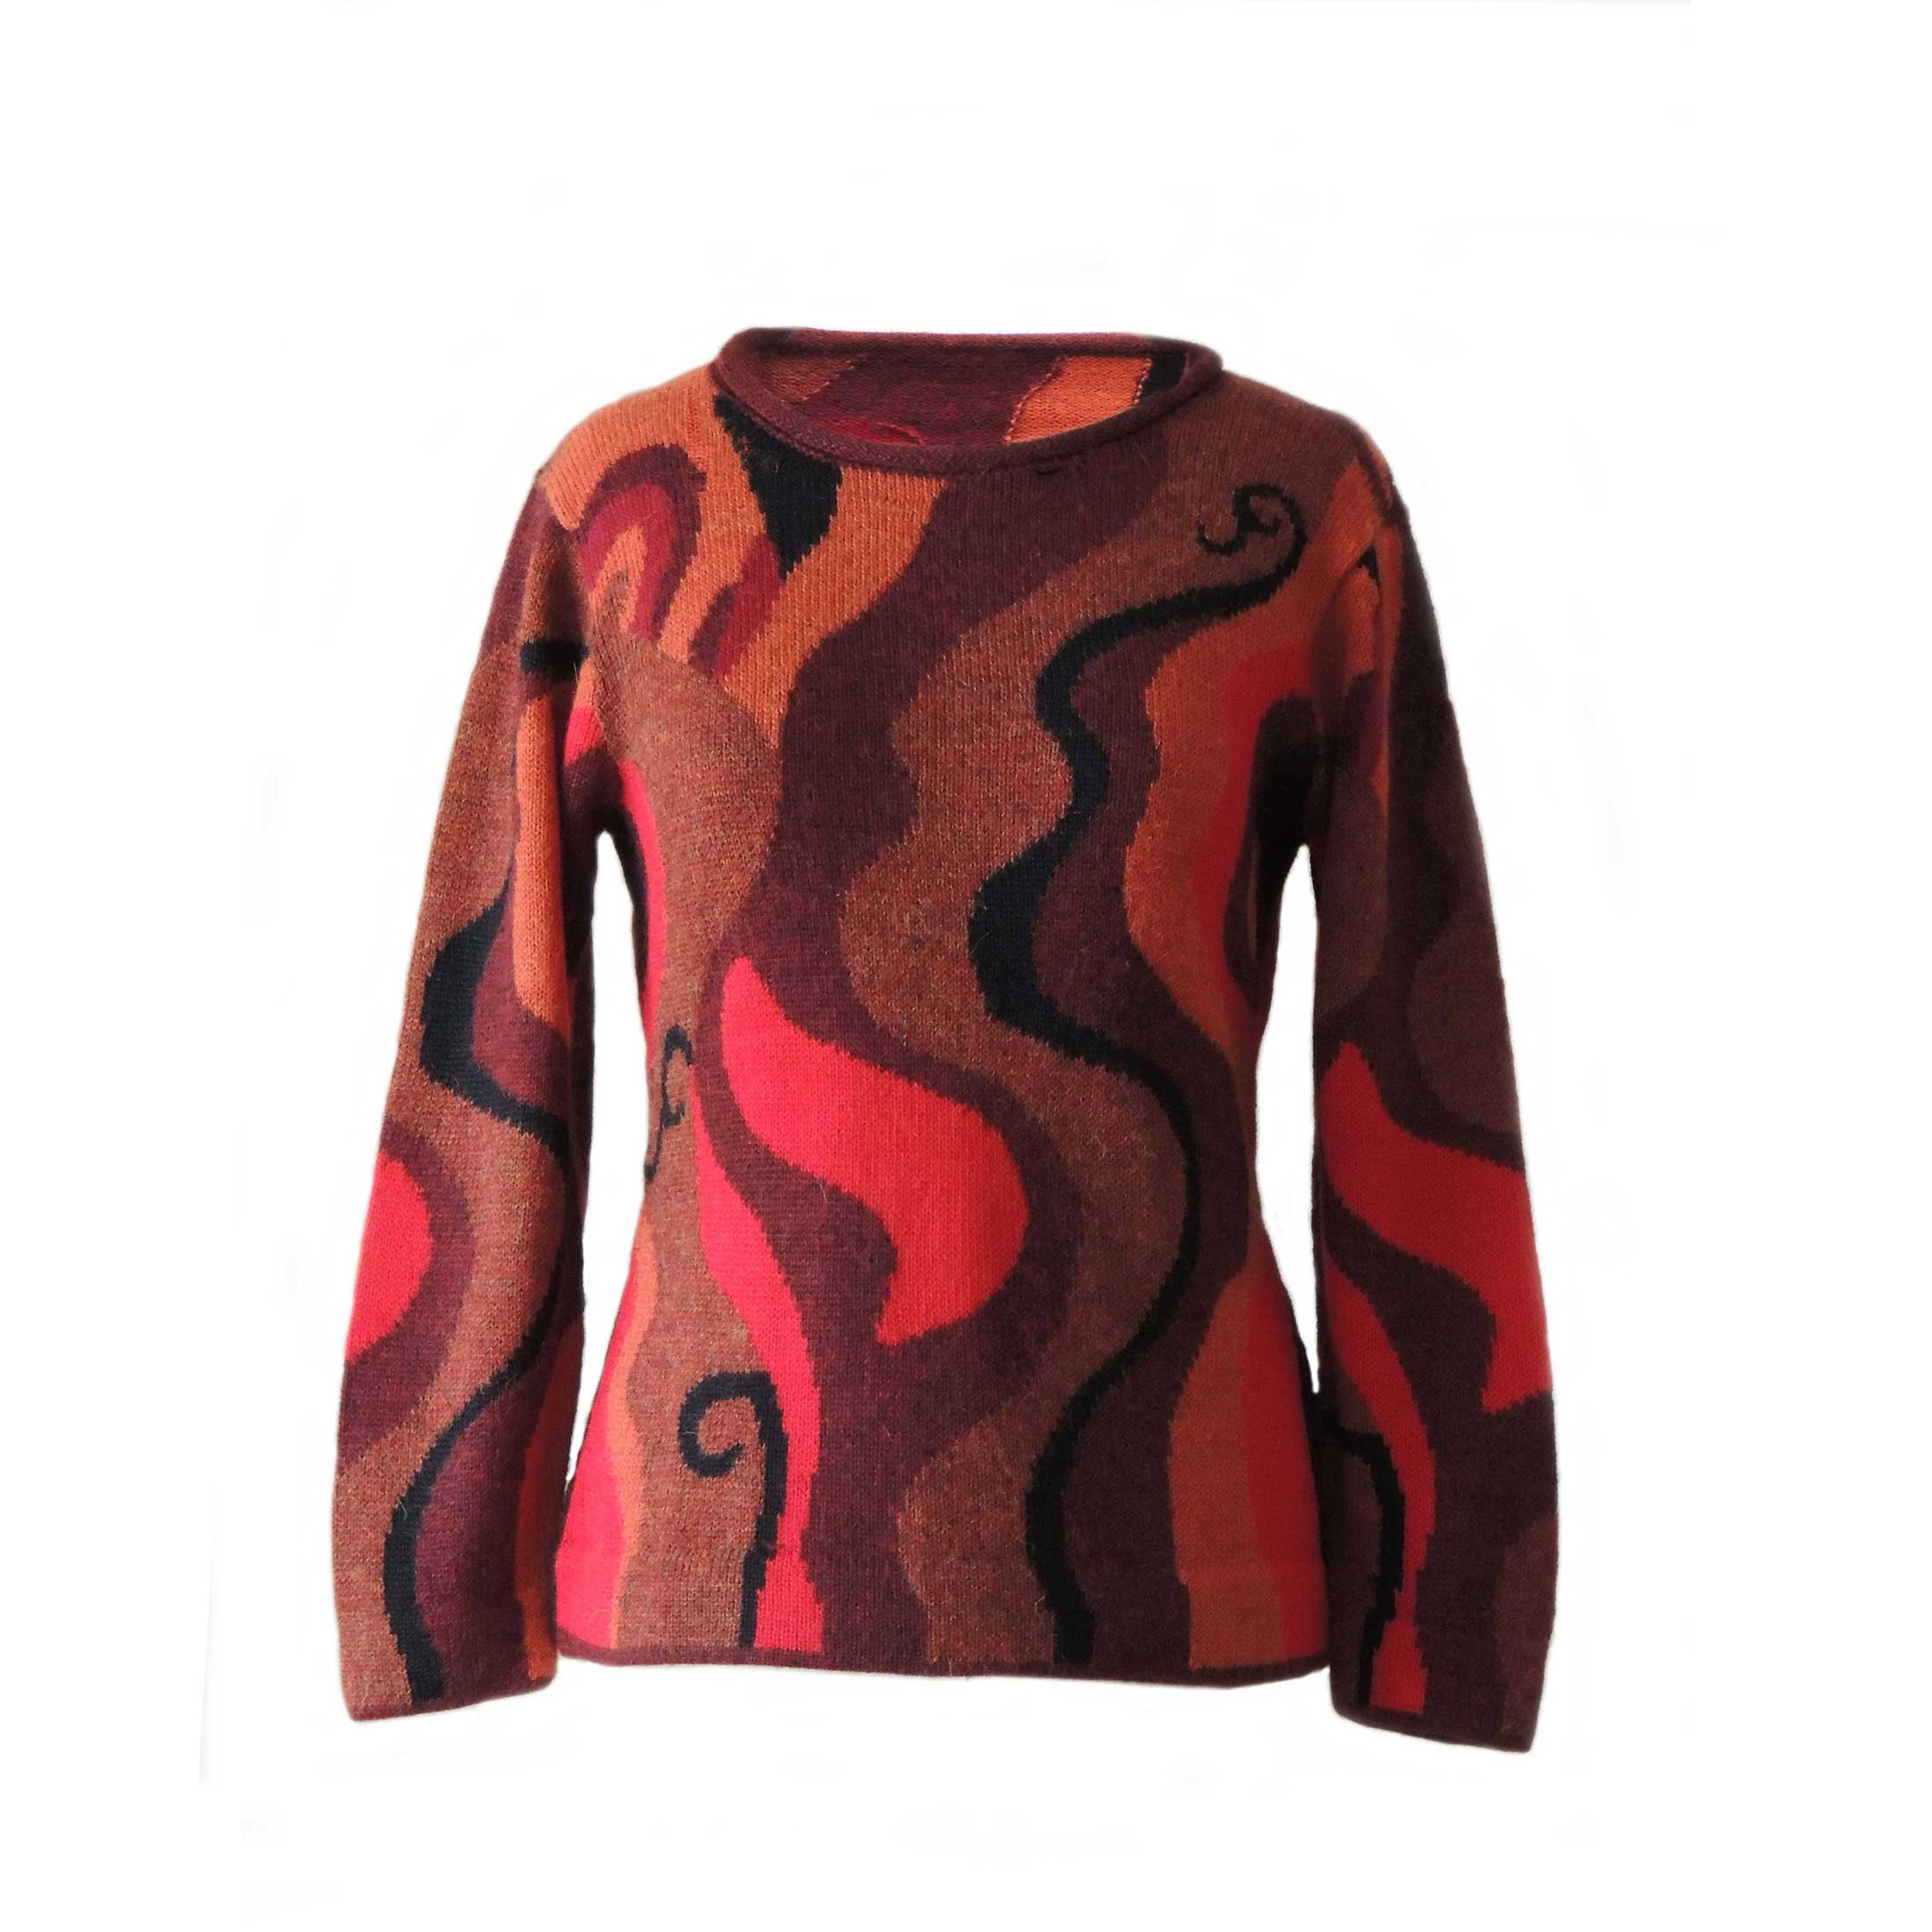 PopsFL knitwear wholesale Women sweater with all over pattern and crew neck 100% alpaca. Artisanal intarsia knitte, made in Peru